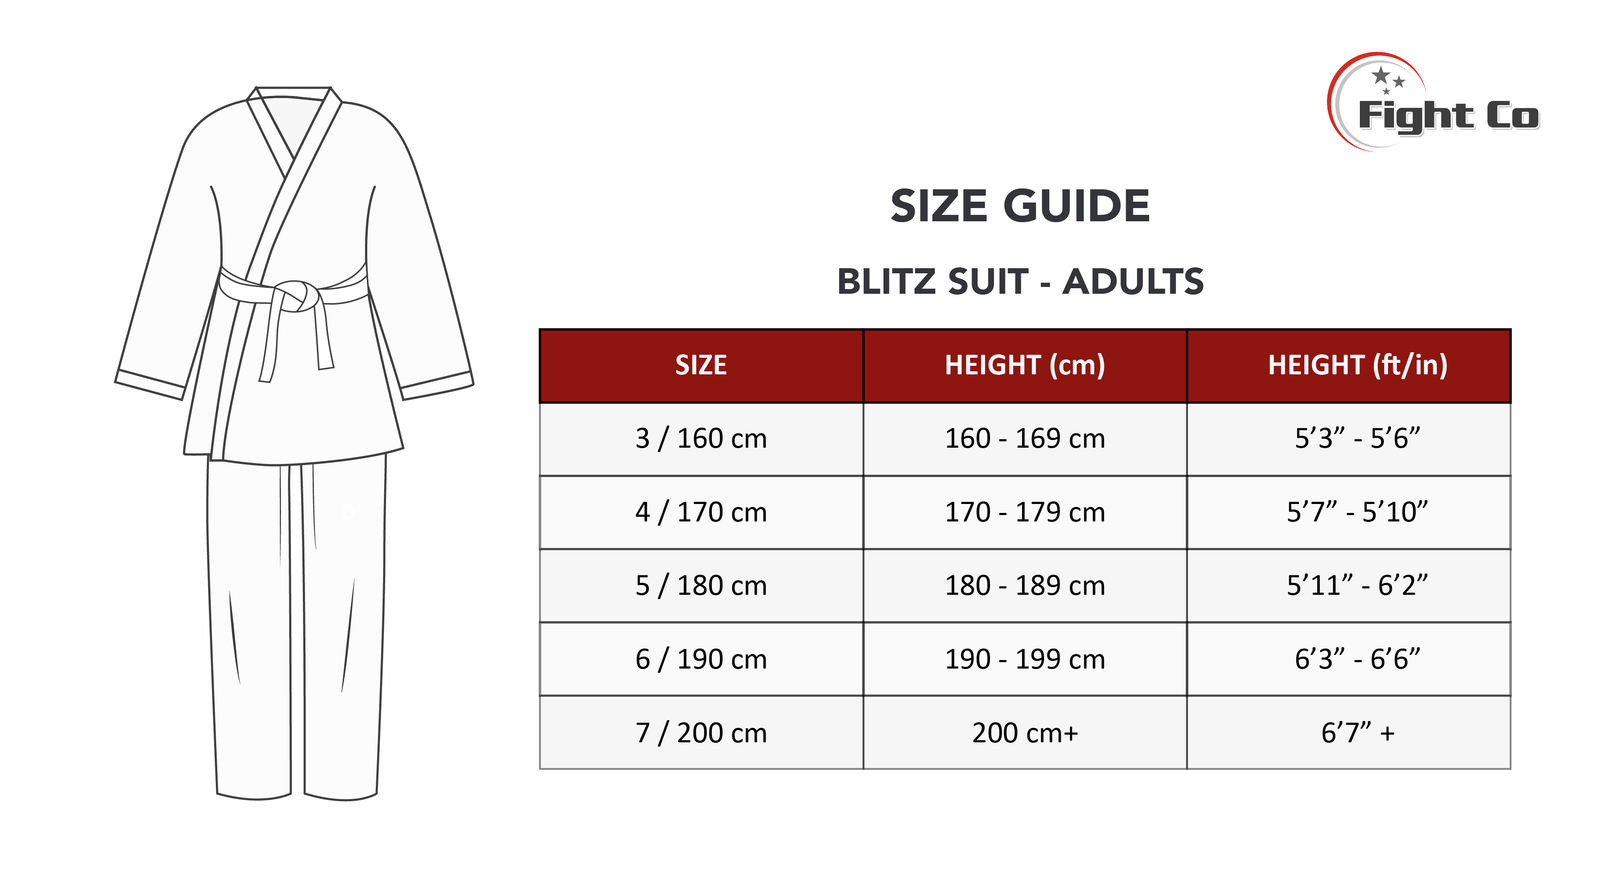 Gi Sizing Guide and Fit Guide  Sanabul